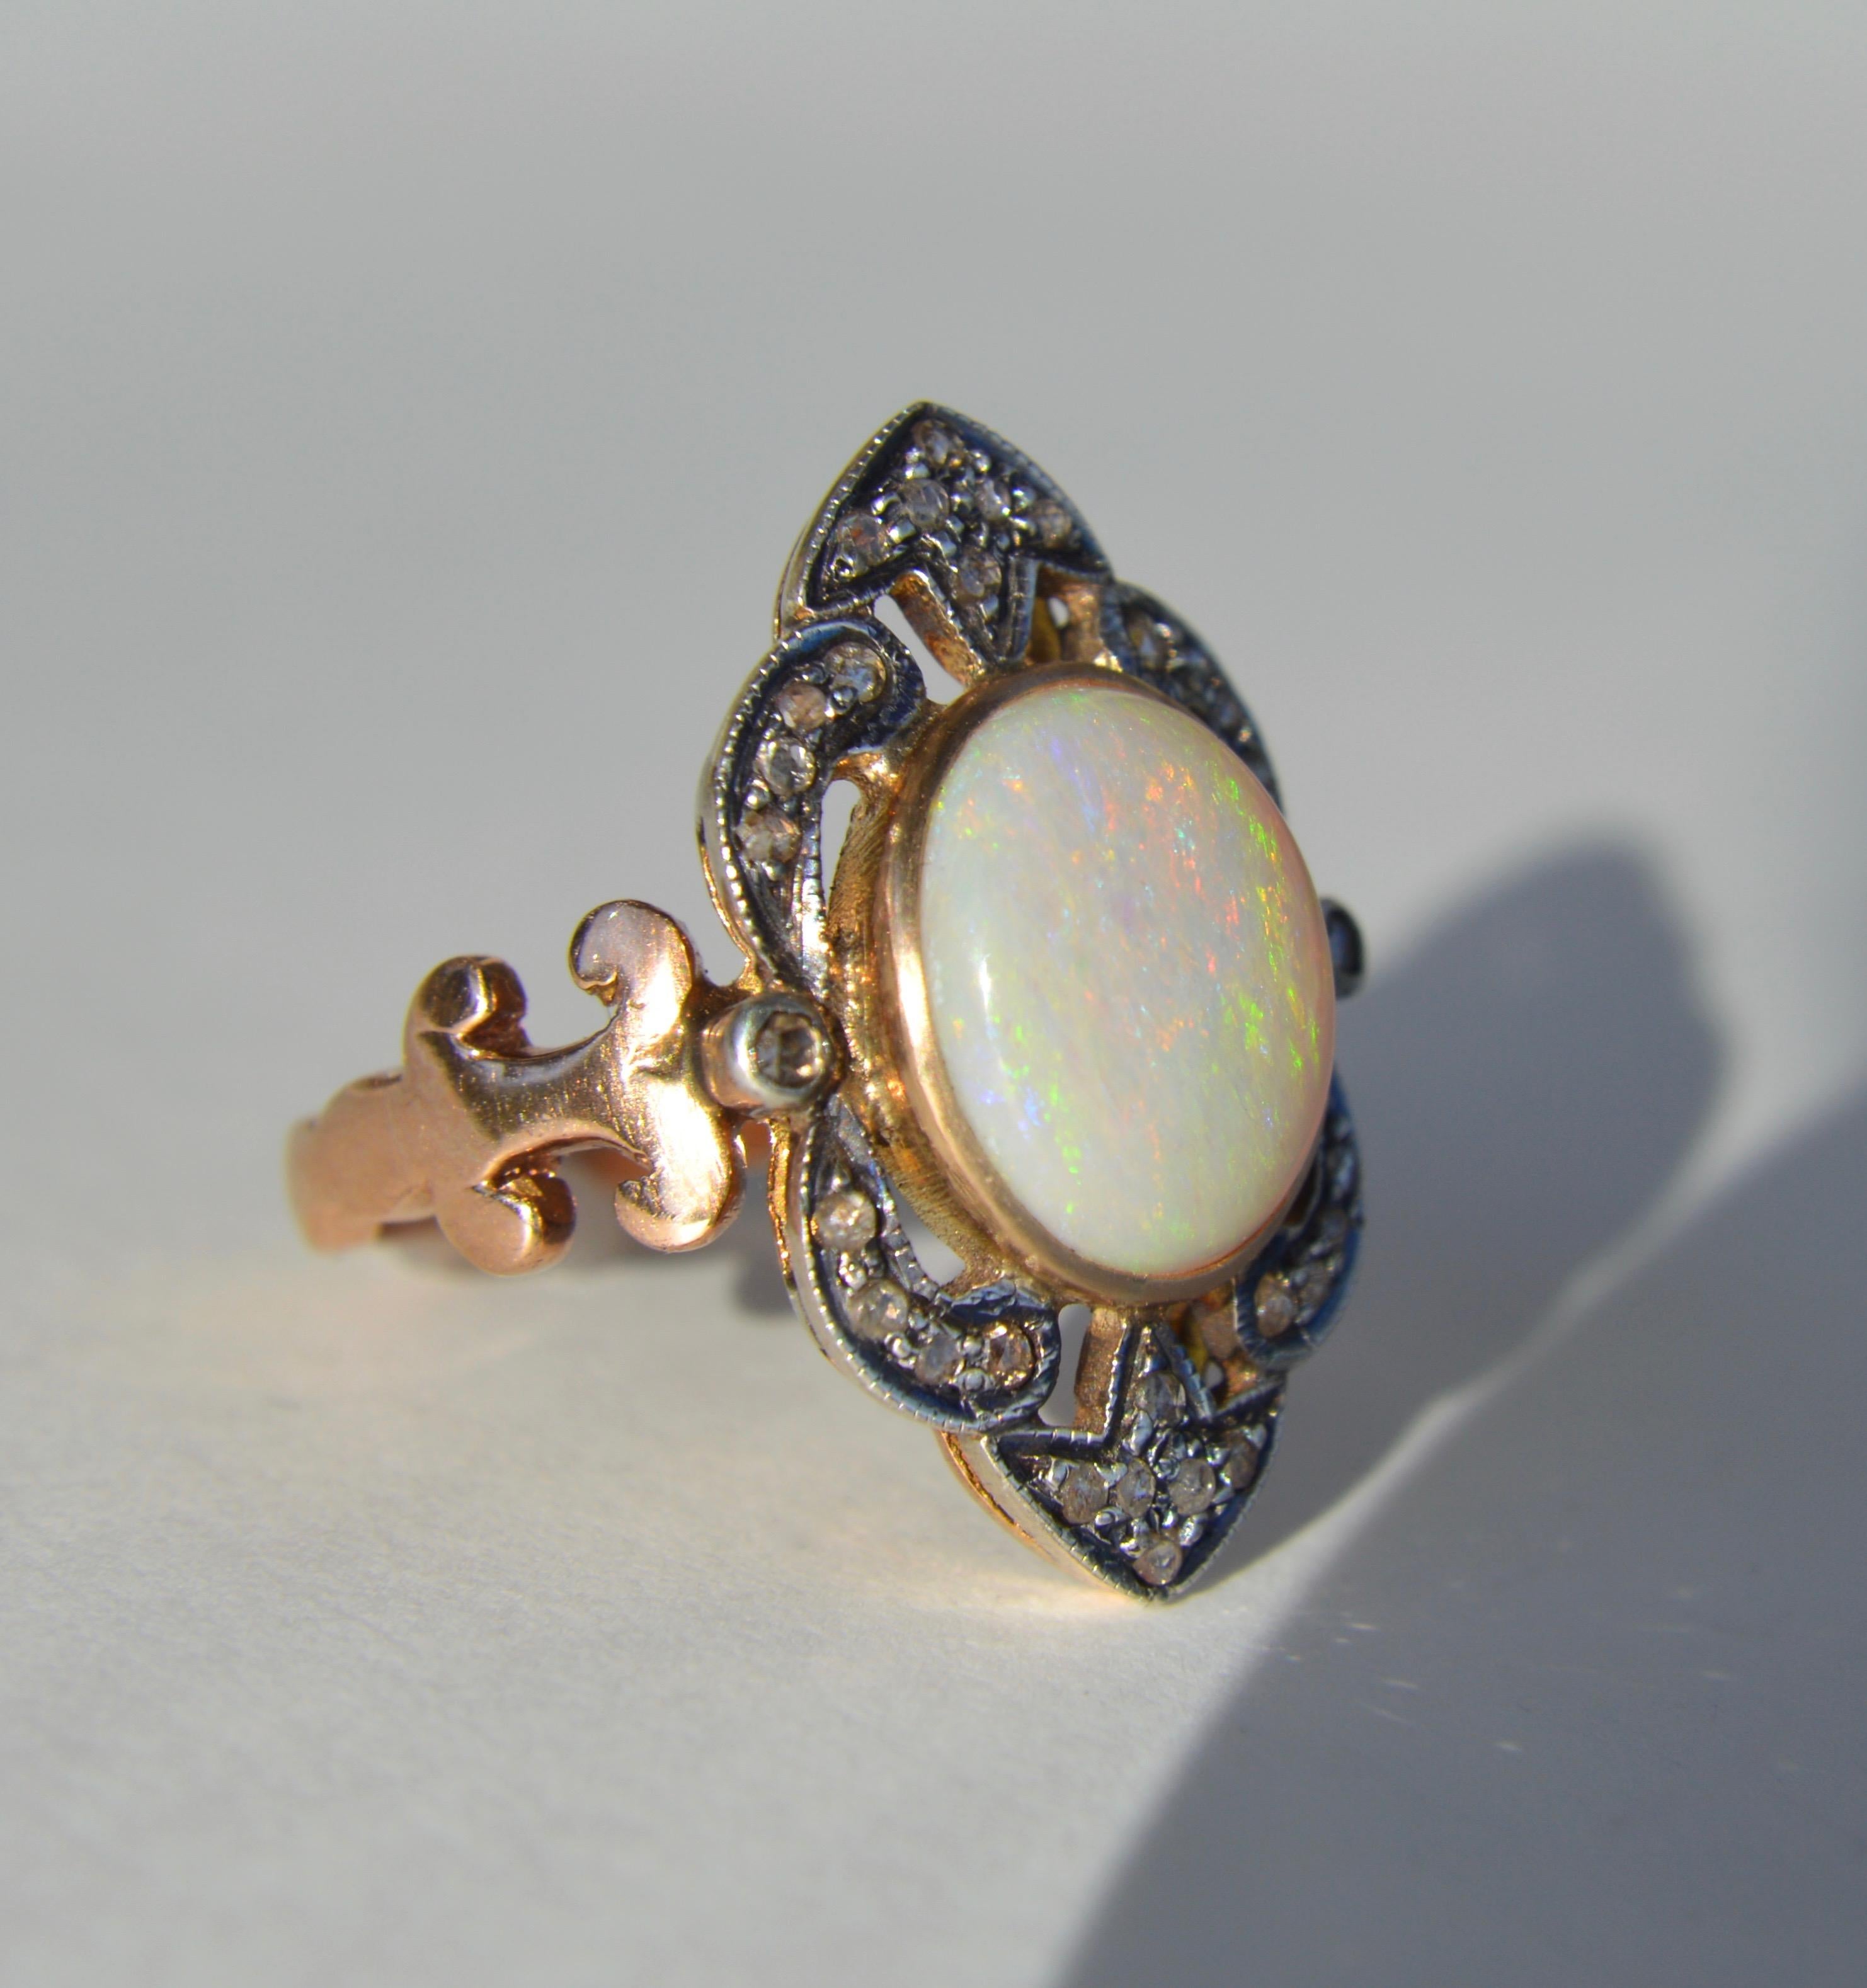 Beautiful antique Art Deco circa 1920s opal and rosecut diamond 10K rose gold cocktail ring. In very good condition, there is a faint line on back of shank where the ring was once resized. Ring is unmarked but tested as solid 10K gold. 

Face of